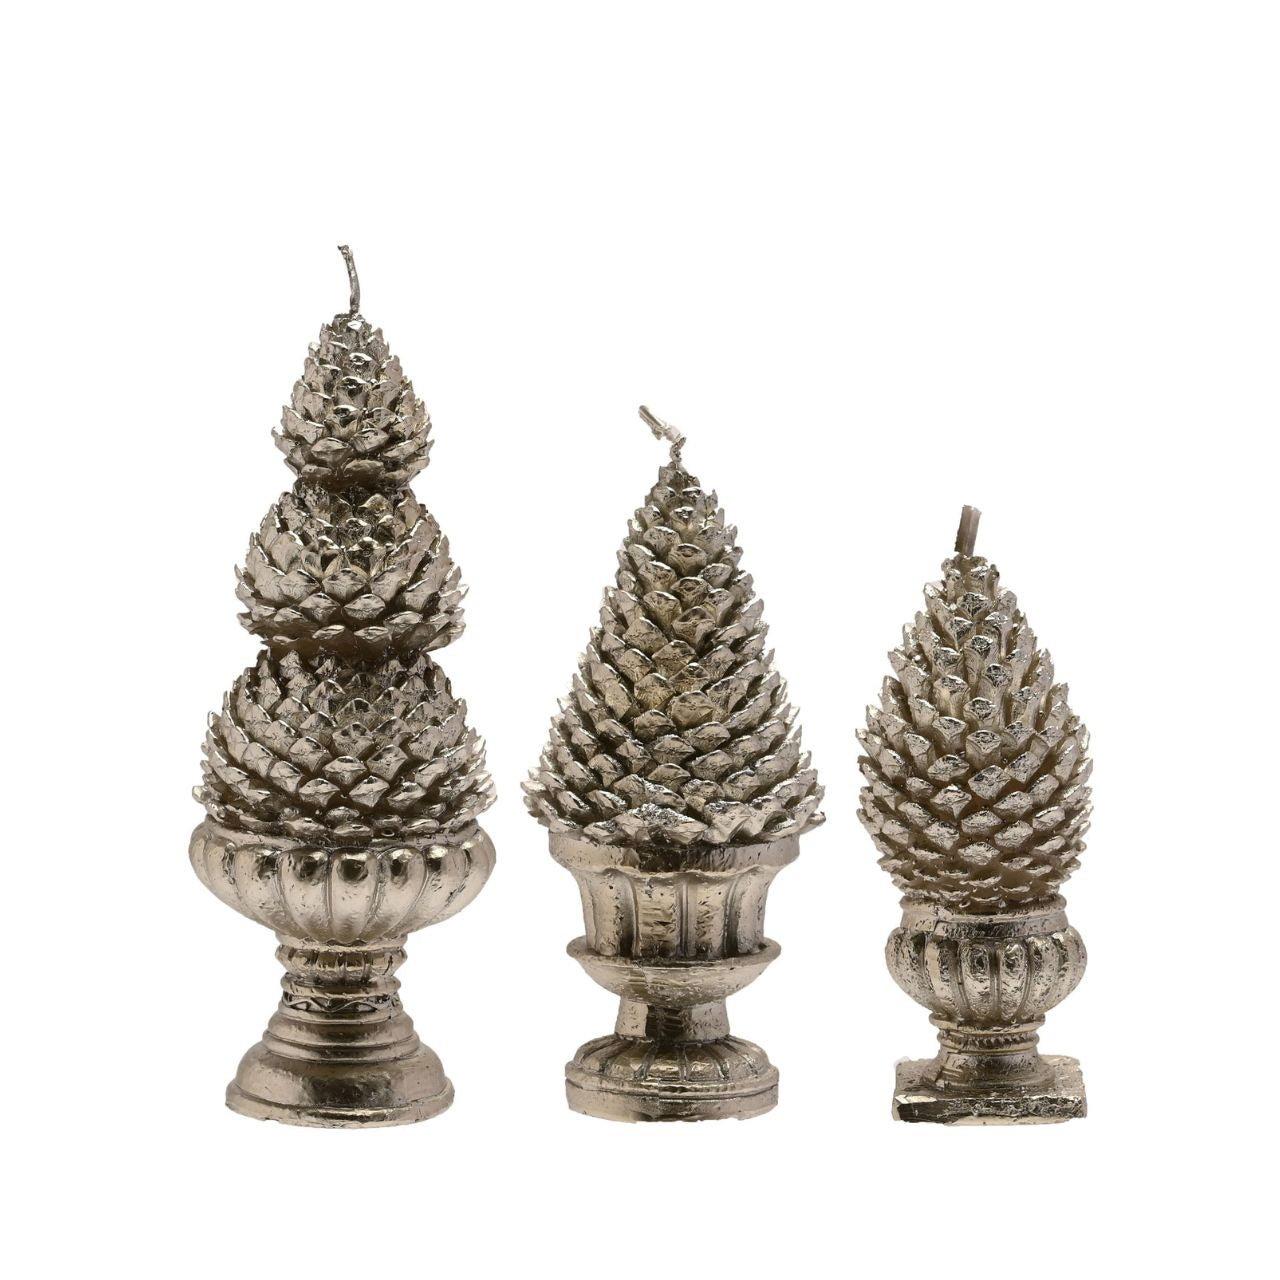 Silver Pinecone Christmas Candles Set  A set of 3 silver pinecone candles by THE SEASONAL GIFT CO.  These standout candles will help to create a magical Winter Wonderland at home when lit during the festive period.